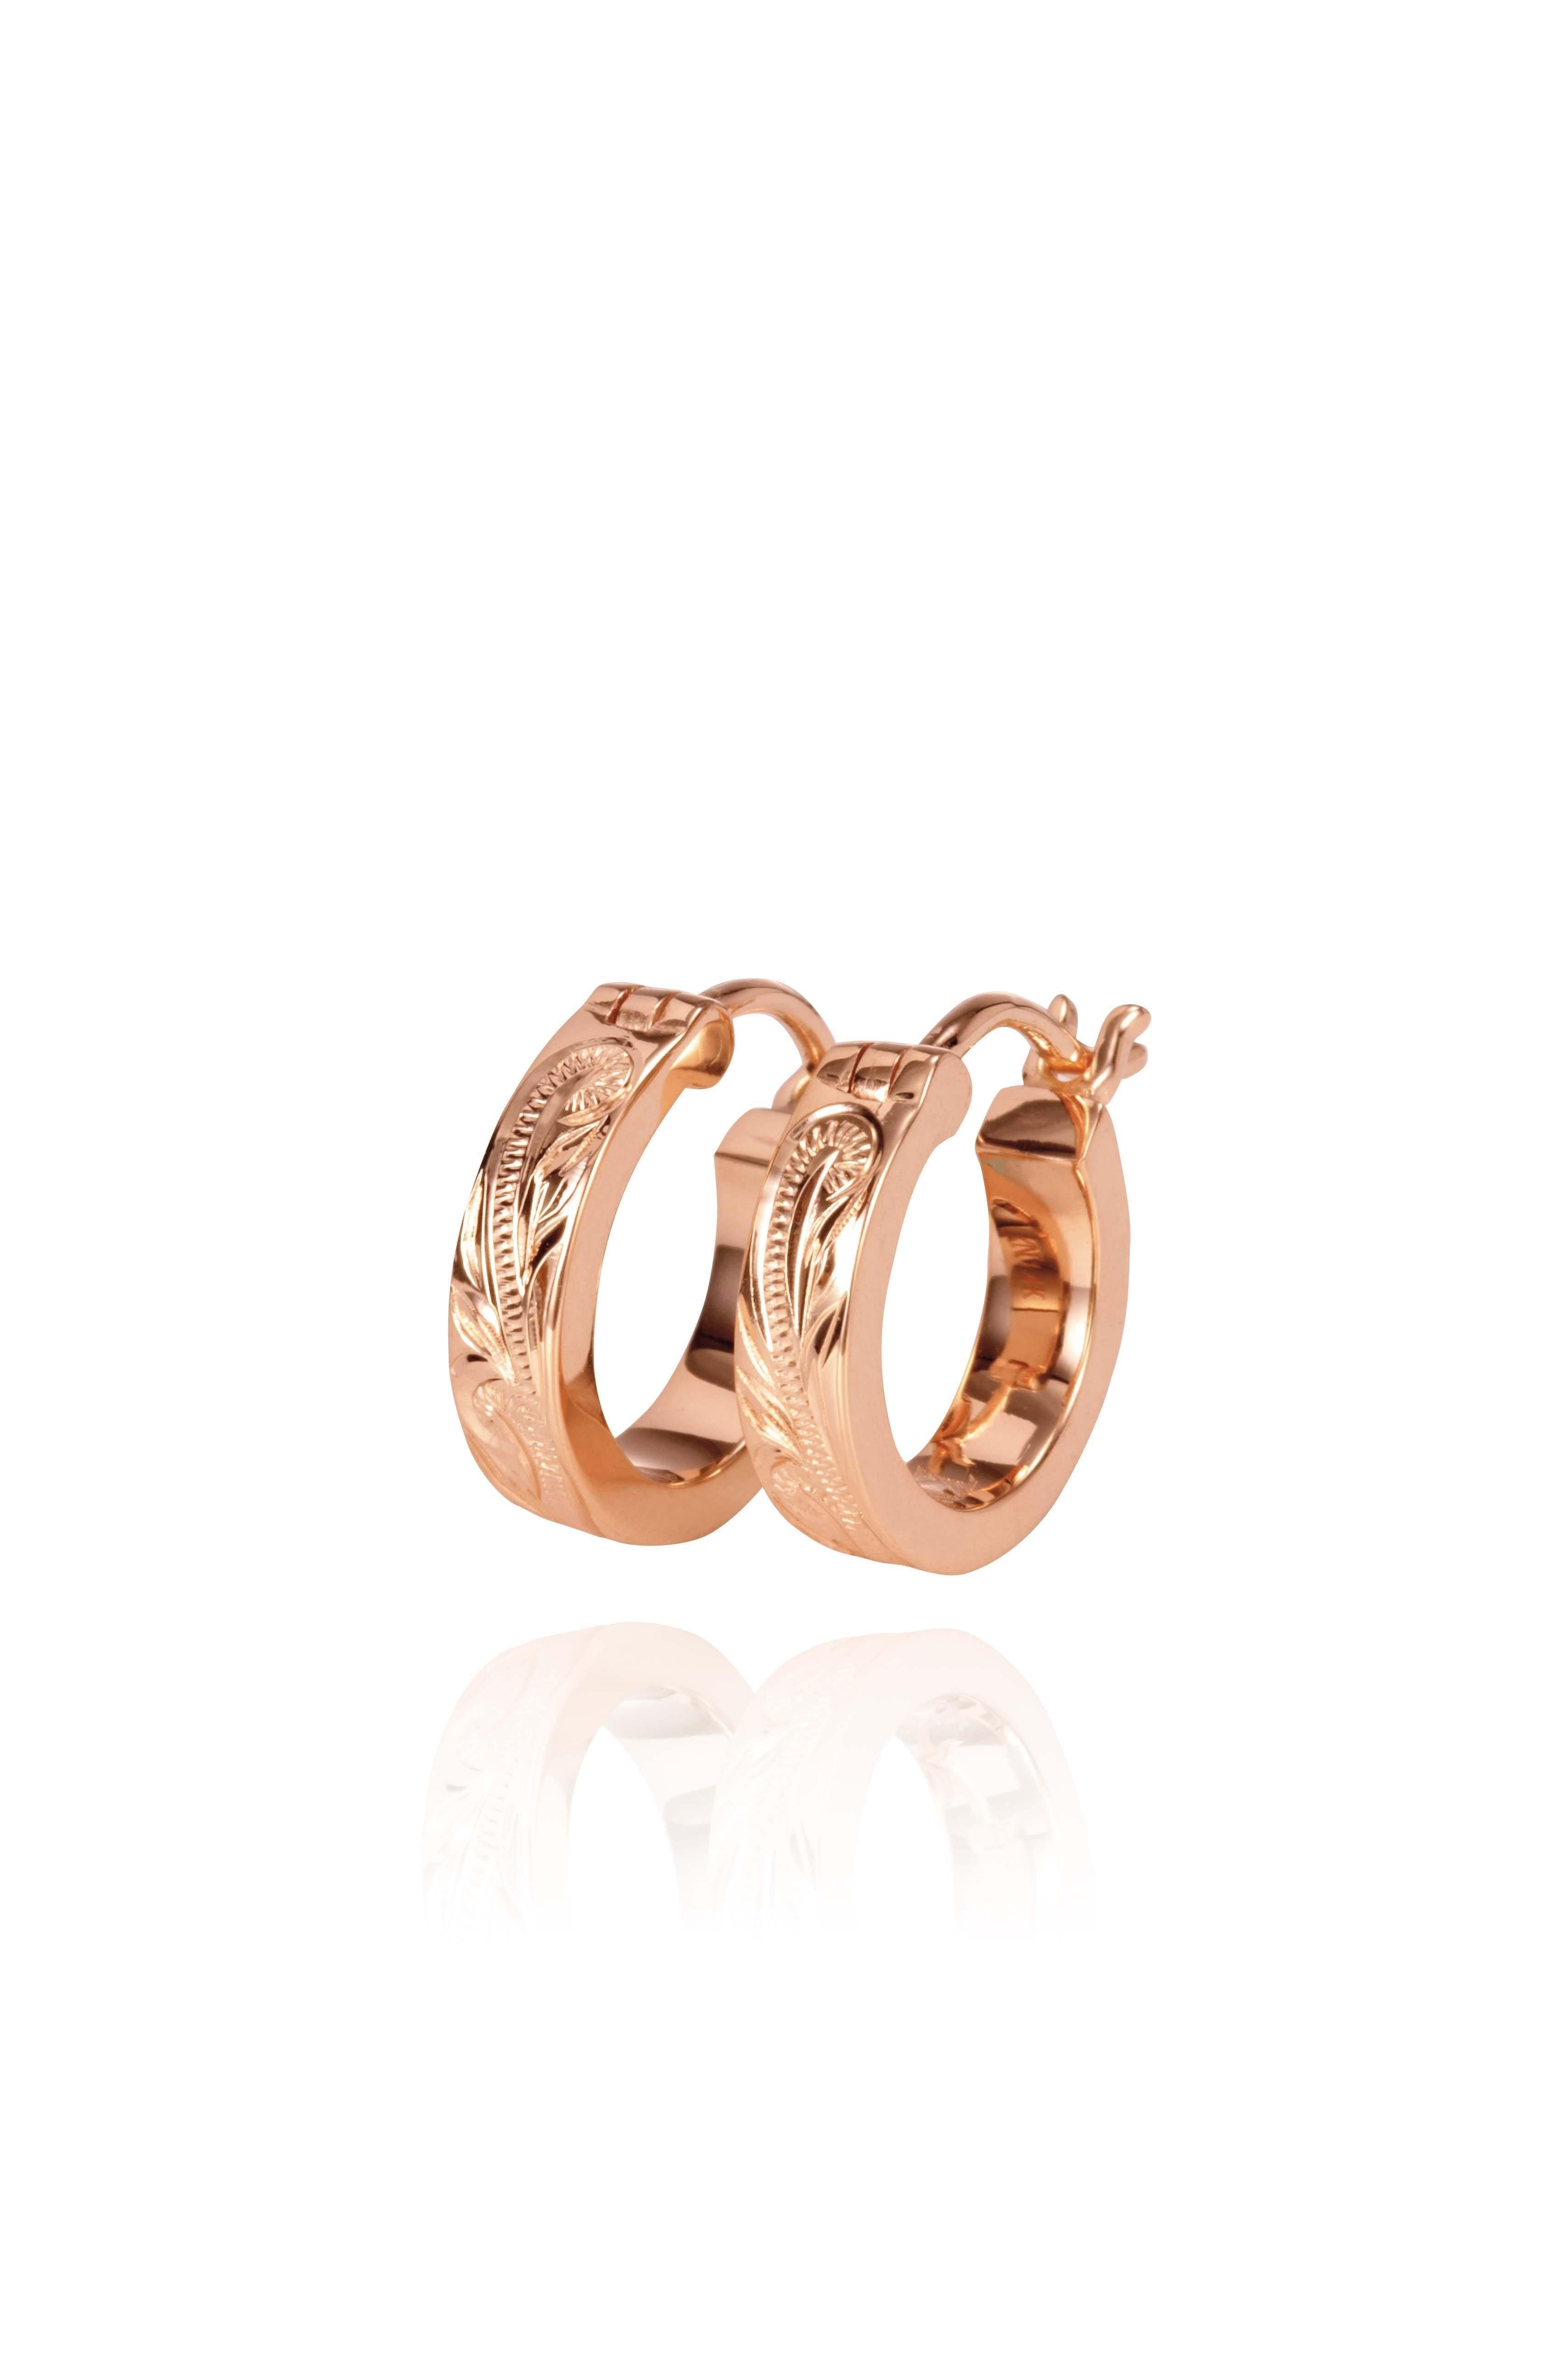 The picture shows a pair of 14K rose gold mini hoop earrings with scroll engraving.